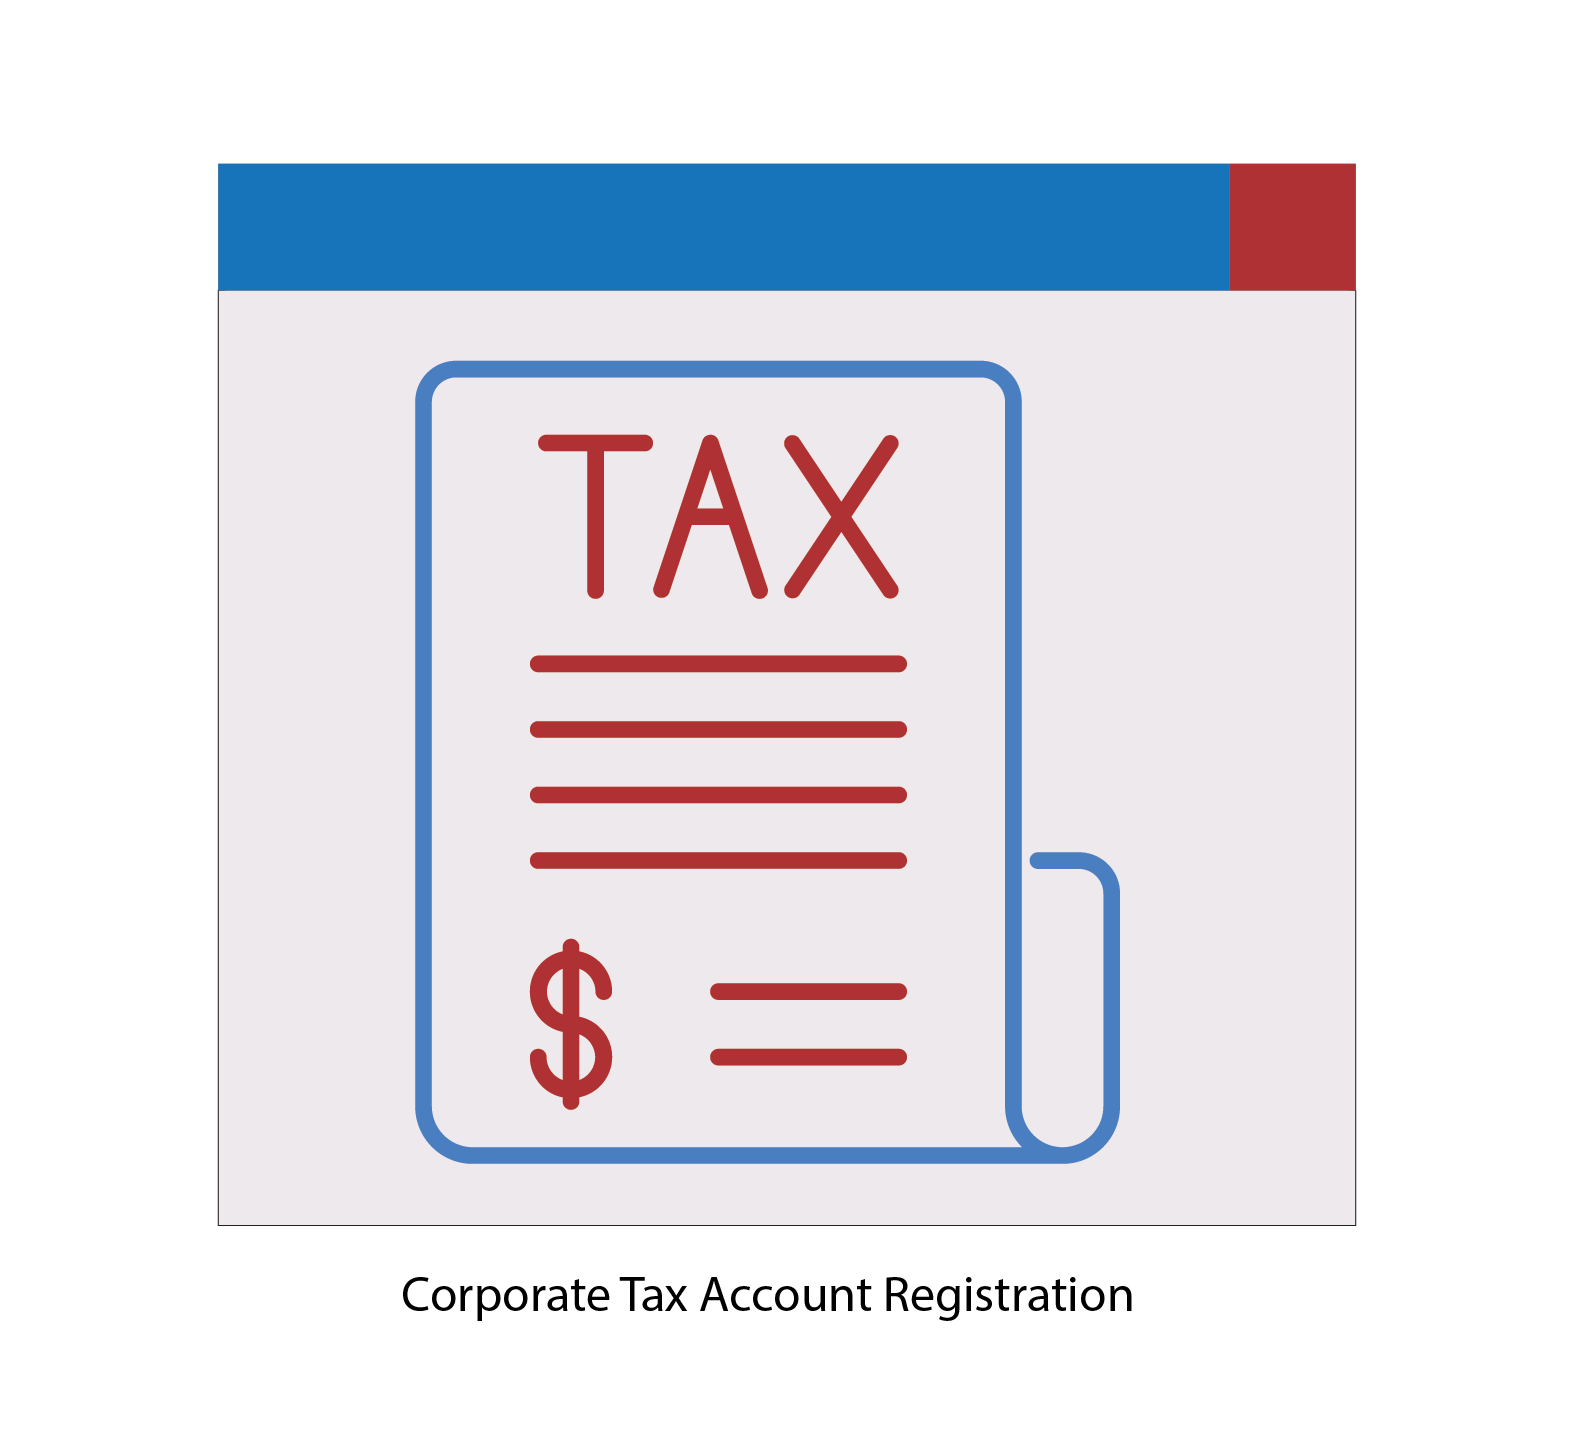 Online Corporate Tax Account Registration